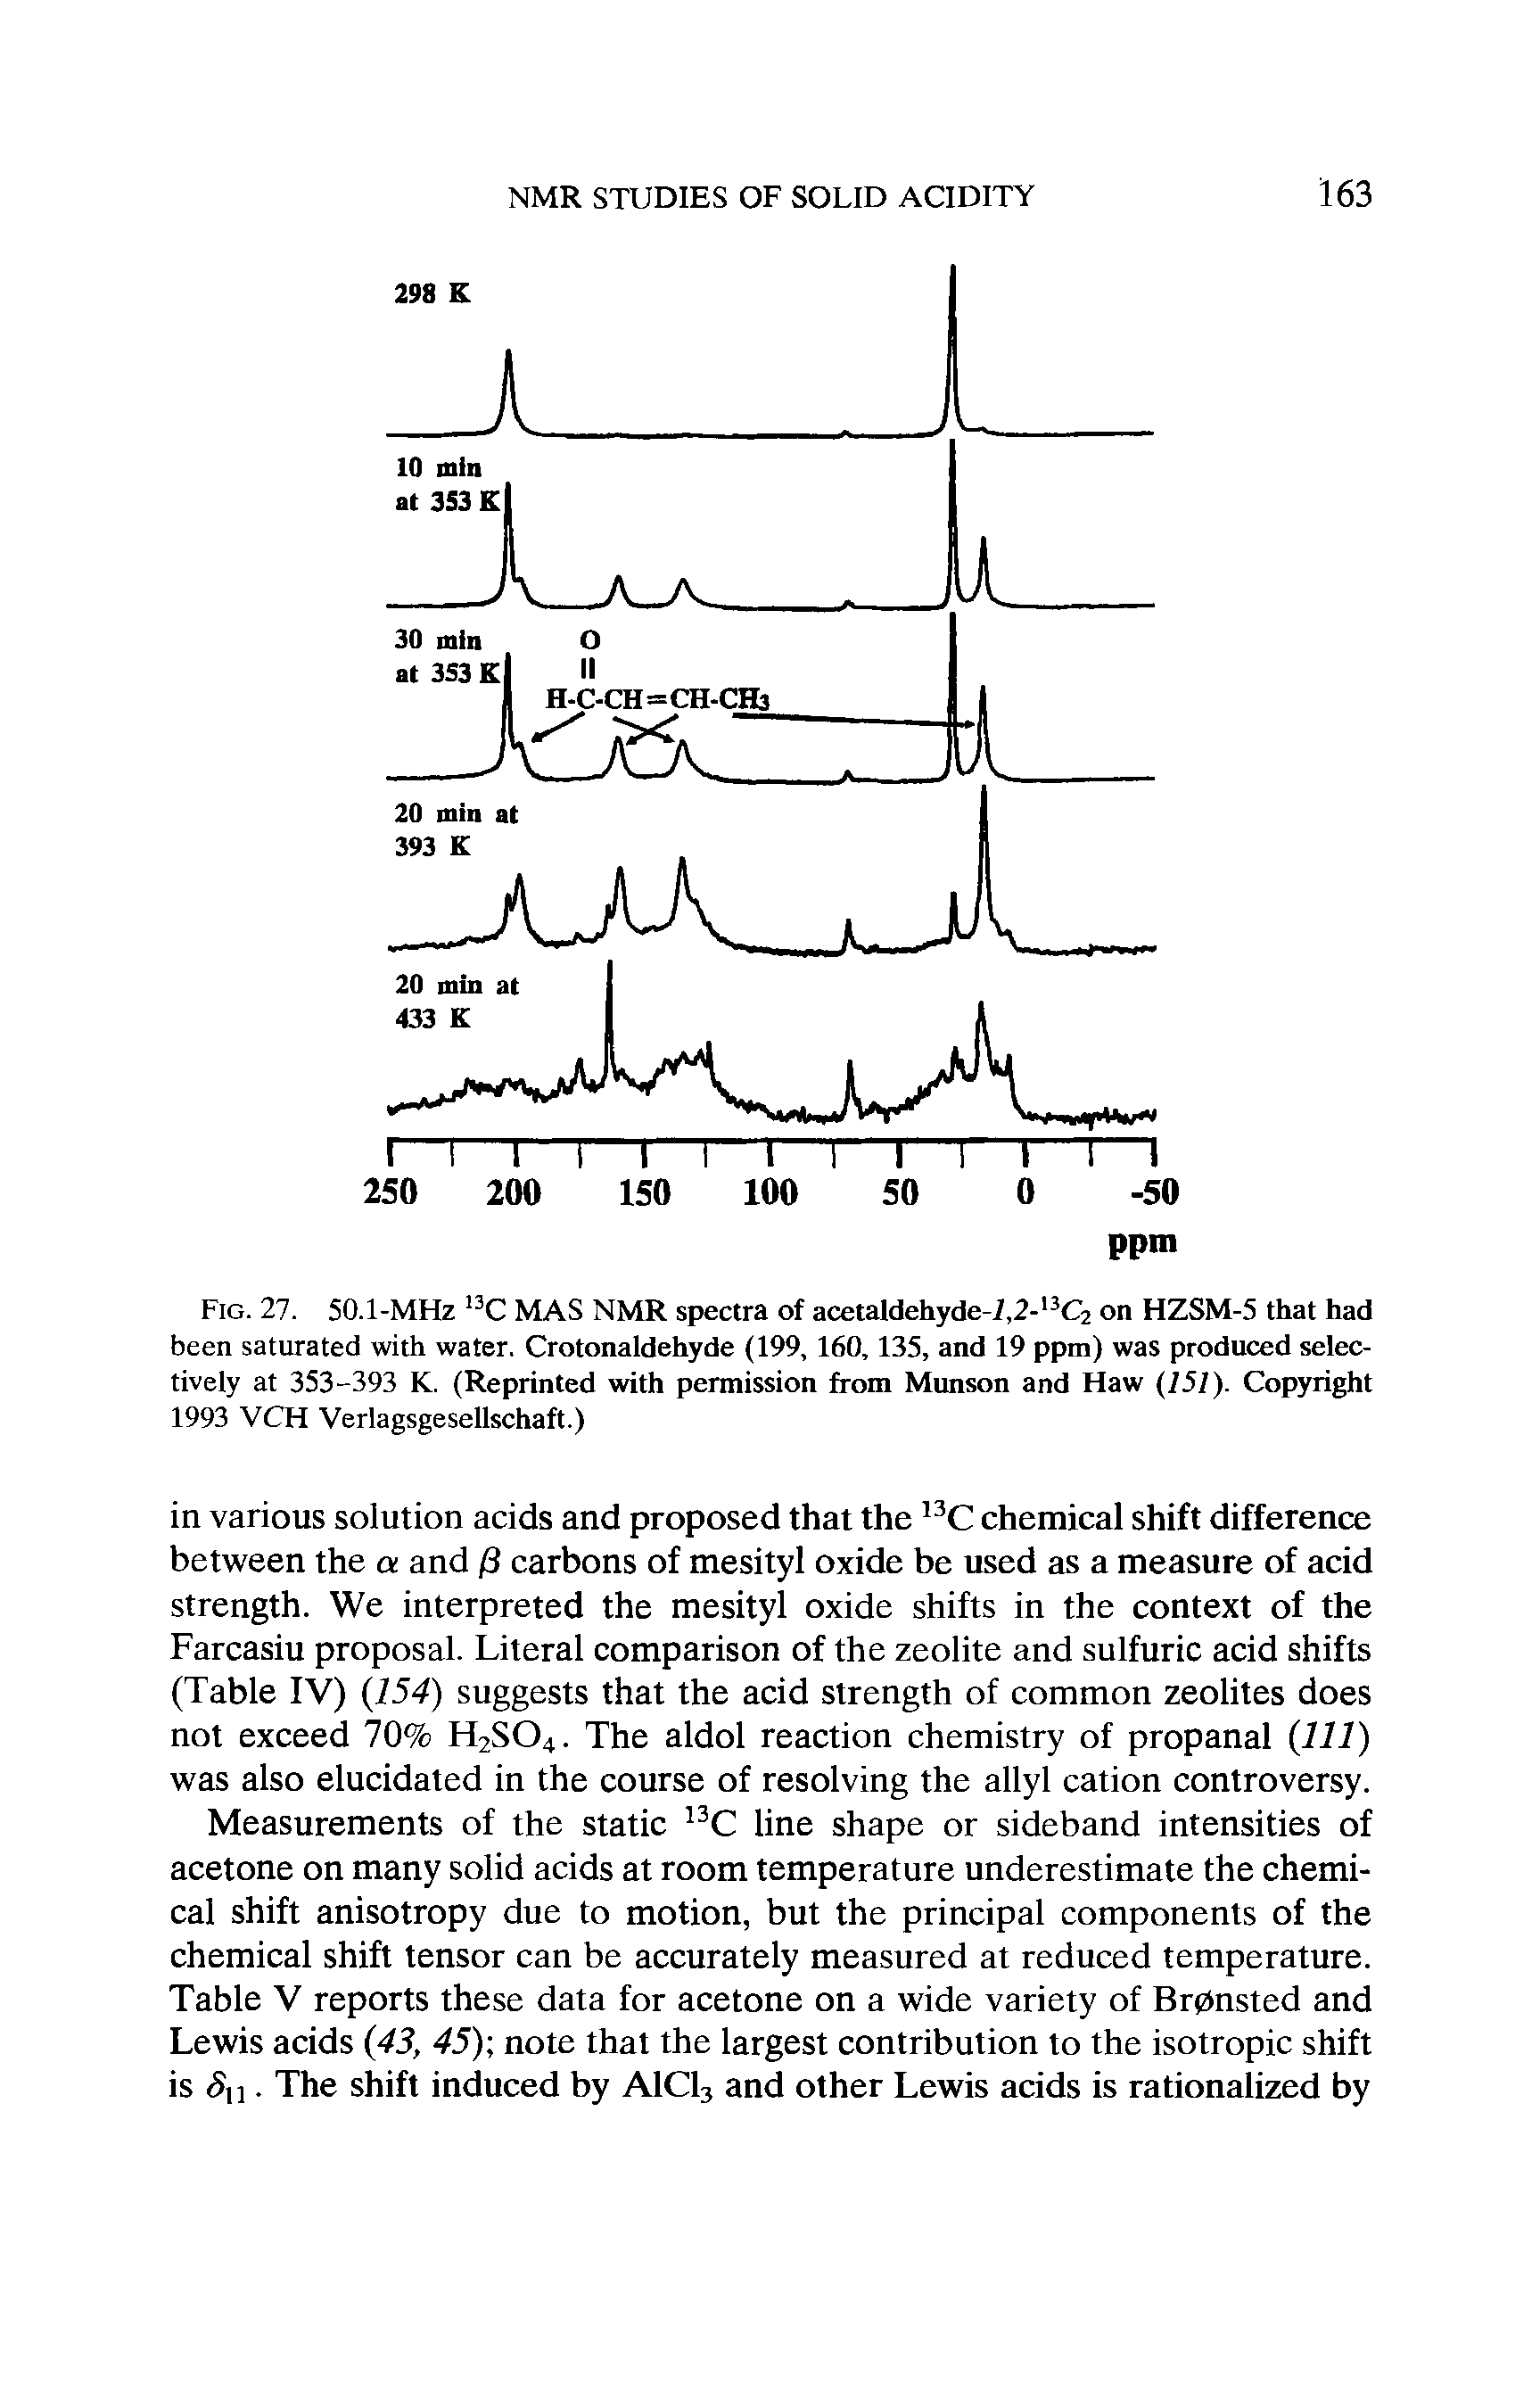 Fig. 27. 50.1-MHz 13C MAS NMR spectra of acetaldehyde-/,2-13C2 on HZSM-5 that had been saturated with water. Crotonaldehyde (199, 160, 135, and 19 ppm) was produced selectively at 353-393 K. (Reprinted with permission from Munson and Haw (151). Copyright 1993 VCH Verlagsgesellschaft.)...